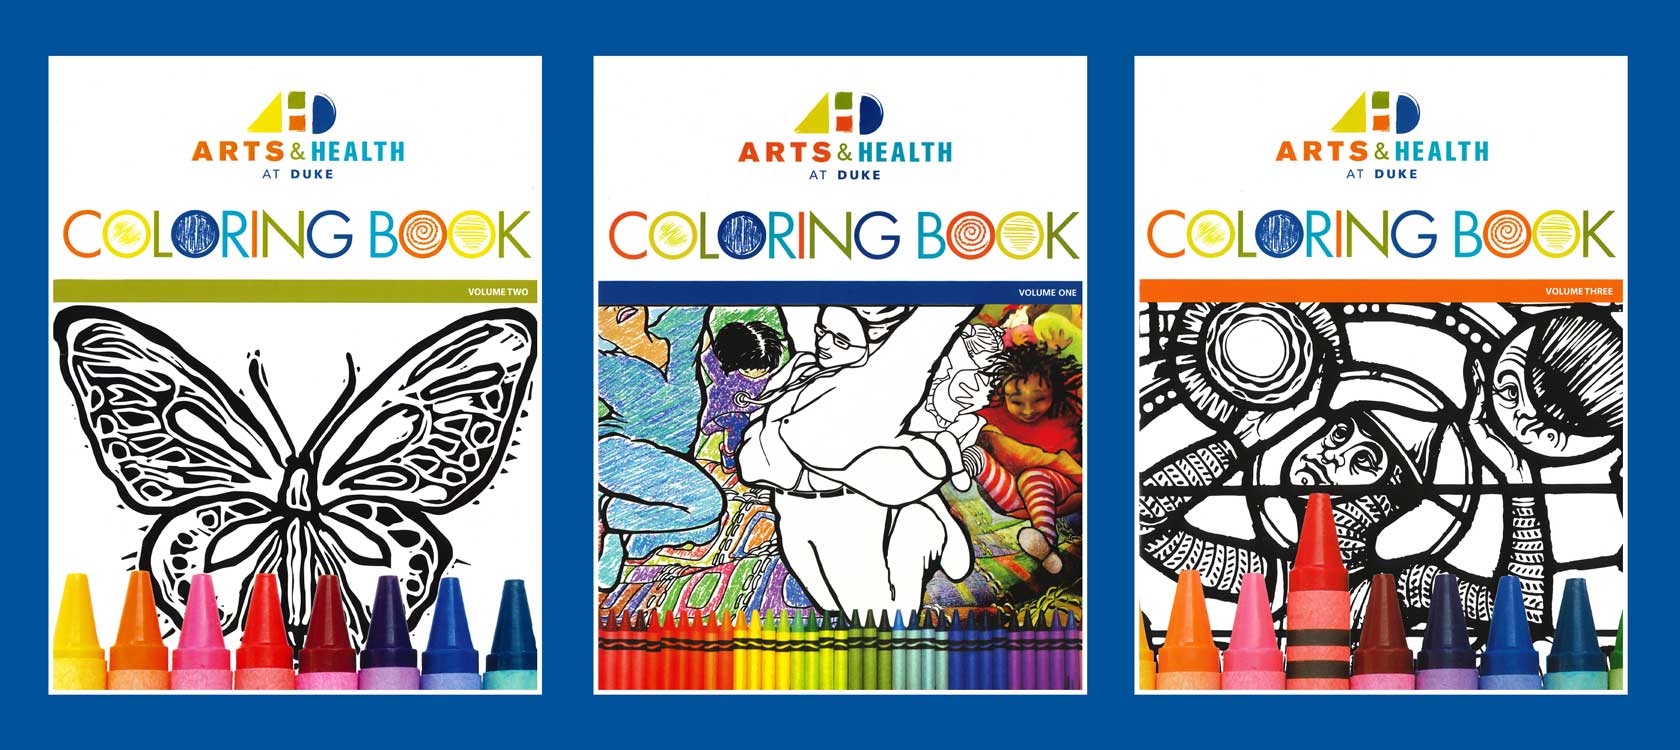 Photos of Arts & Health coloring book covers